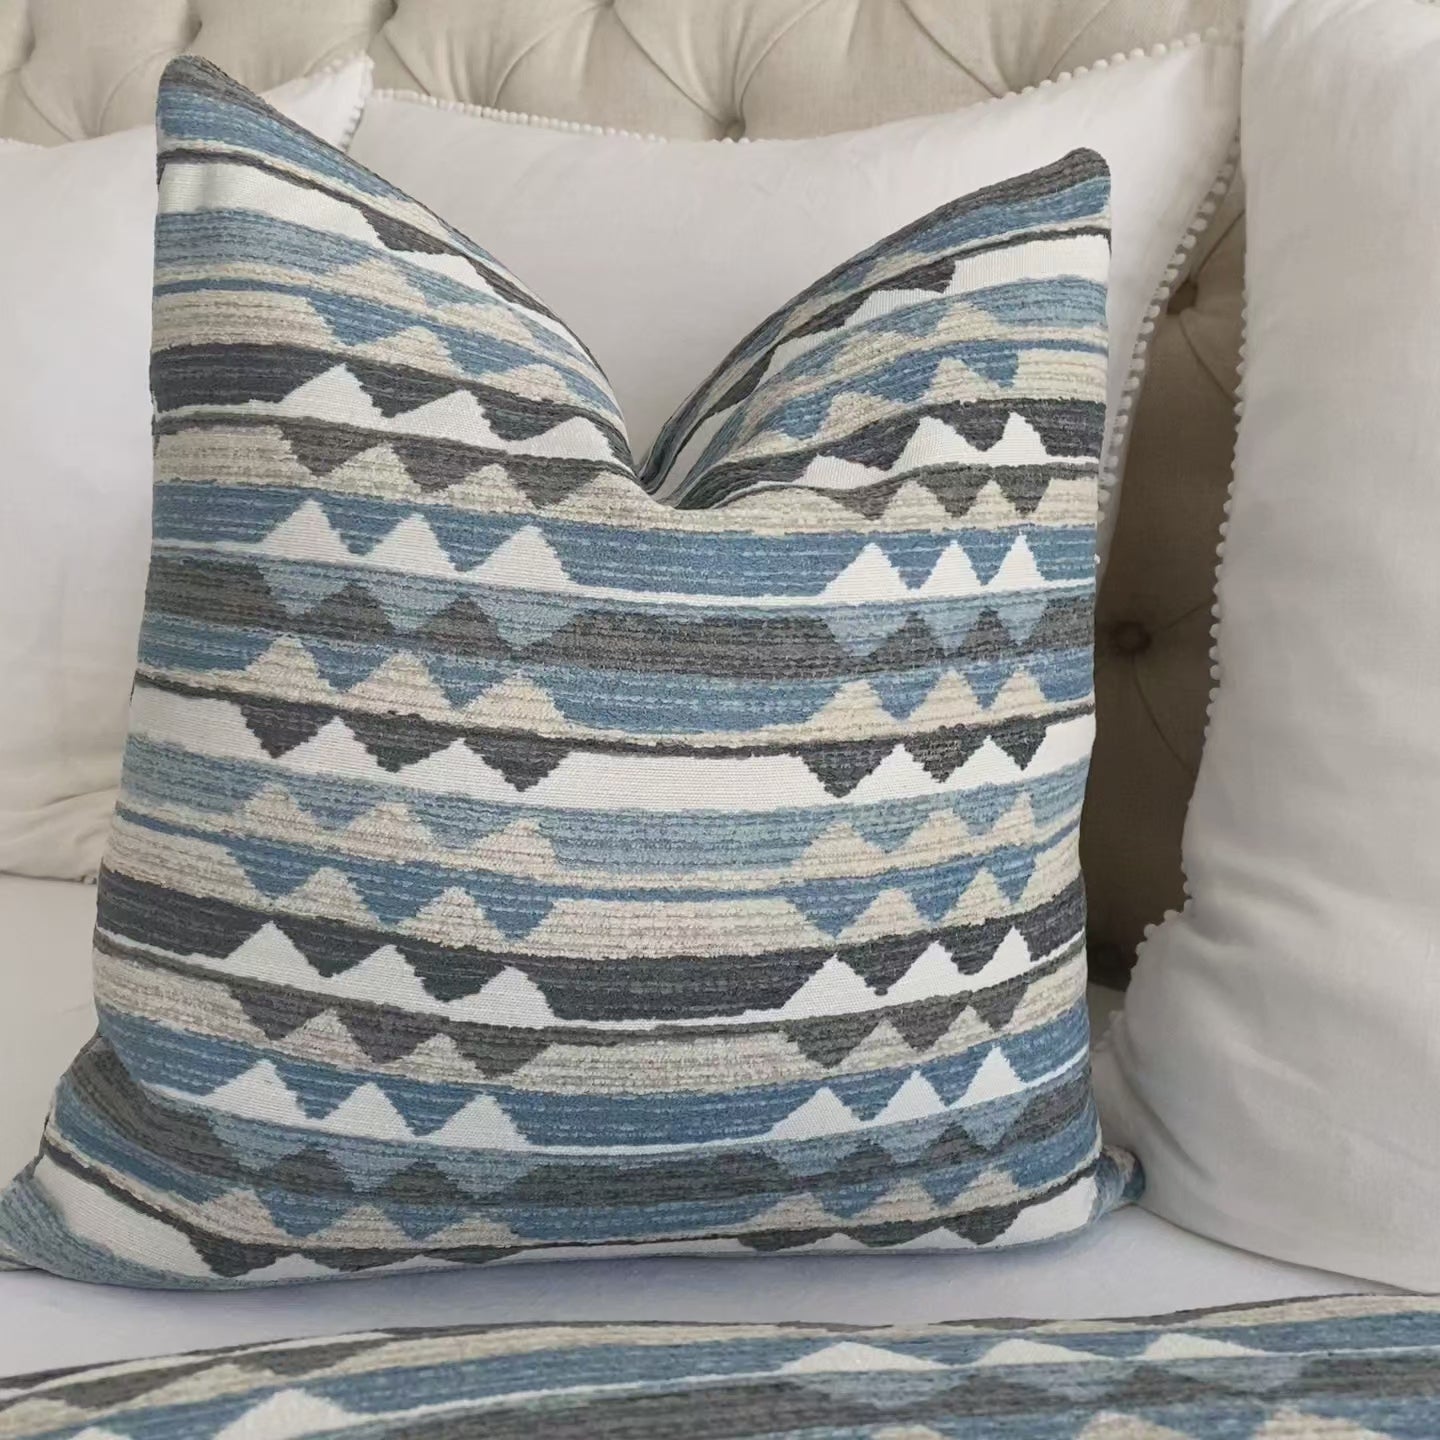 Thibuat Performance Fabric Waterfall Blue Woven Ikat Kilim Pattern Designer Luxury Throw Pillow Cover Product Video